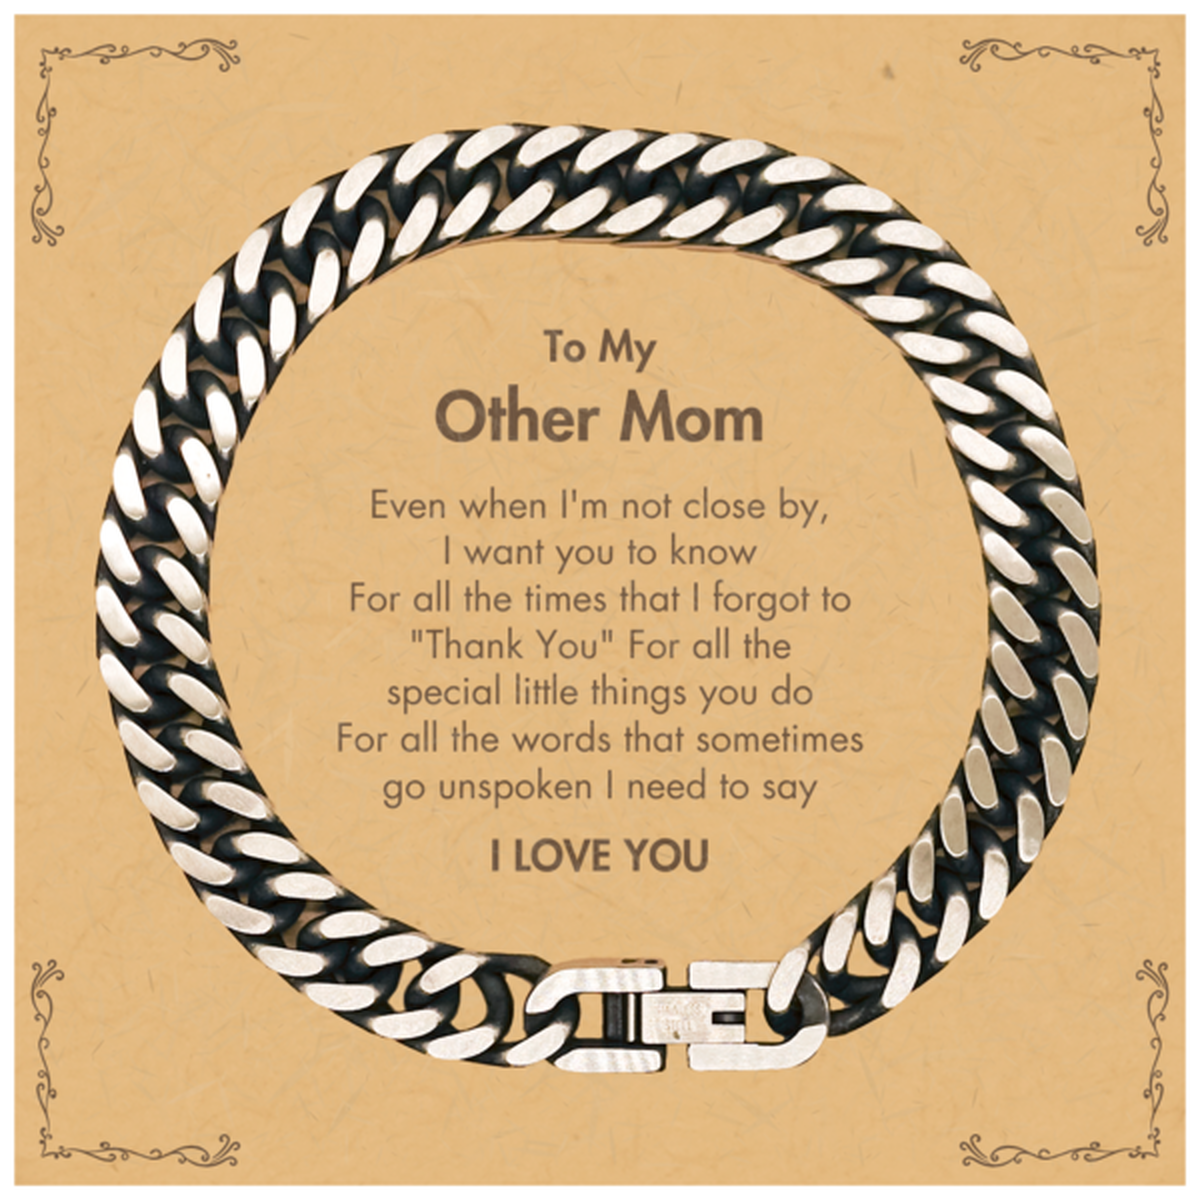 Thank You Gifts for Other Mom, Keepsake Cuban Link Chain Bracelet Gifts for Other Mom Birthday Mother's day Father's Day Other Mom For all the words That sometimes go unspoken I need to say I LOVE YOU